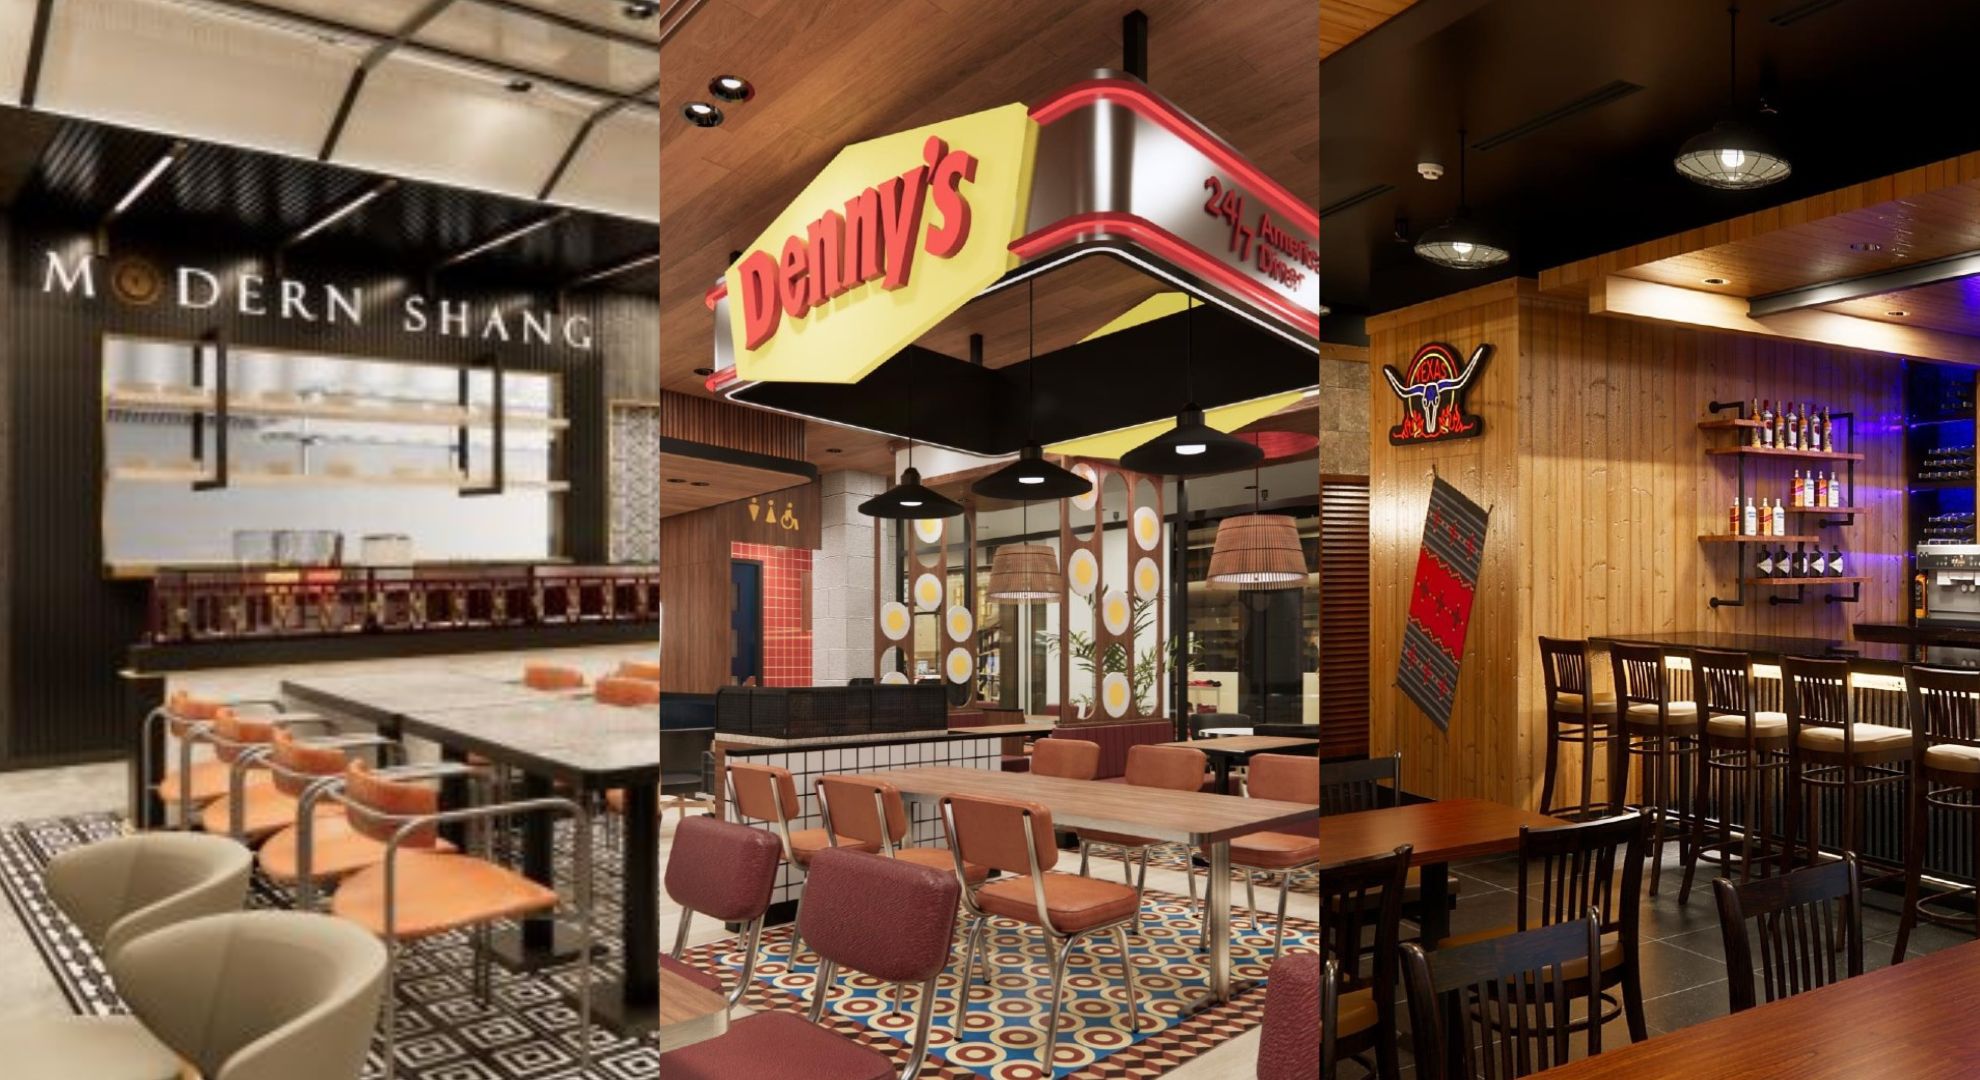 Texas Roadhouse, Denny’s and Modern Shang are now open at Ayala Malls Vermosa